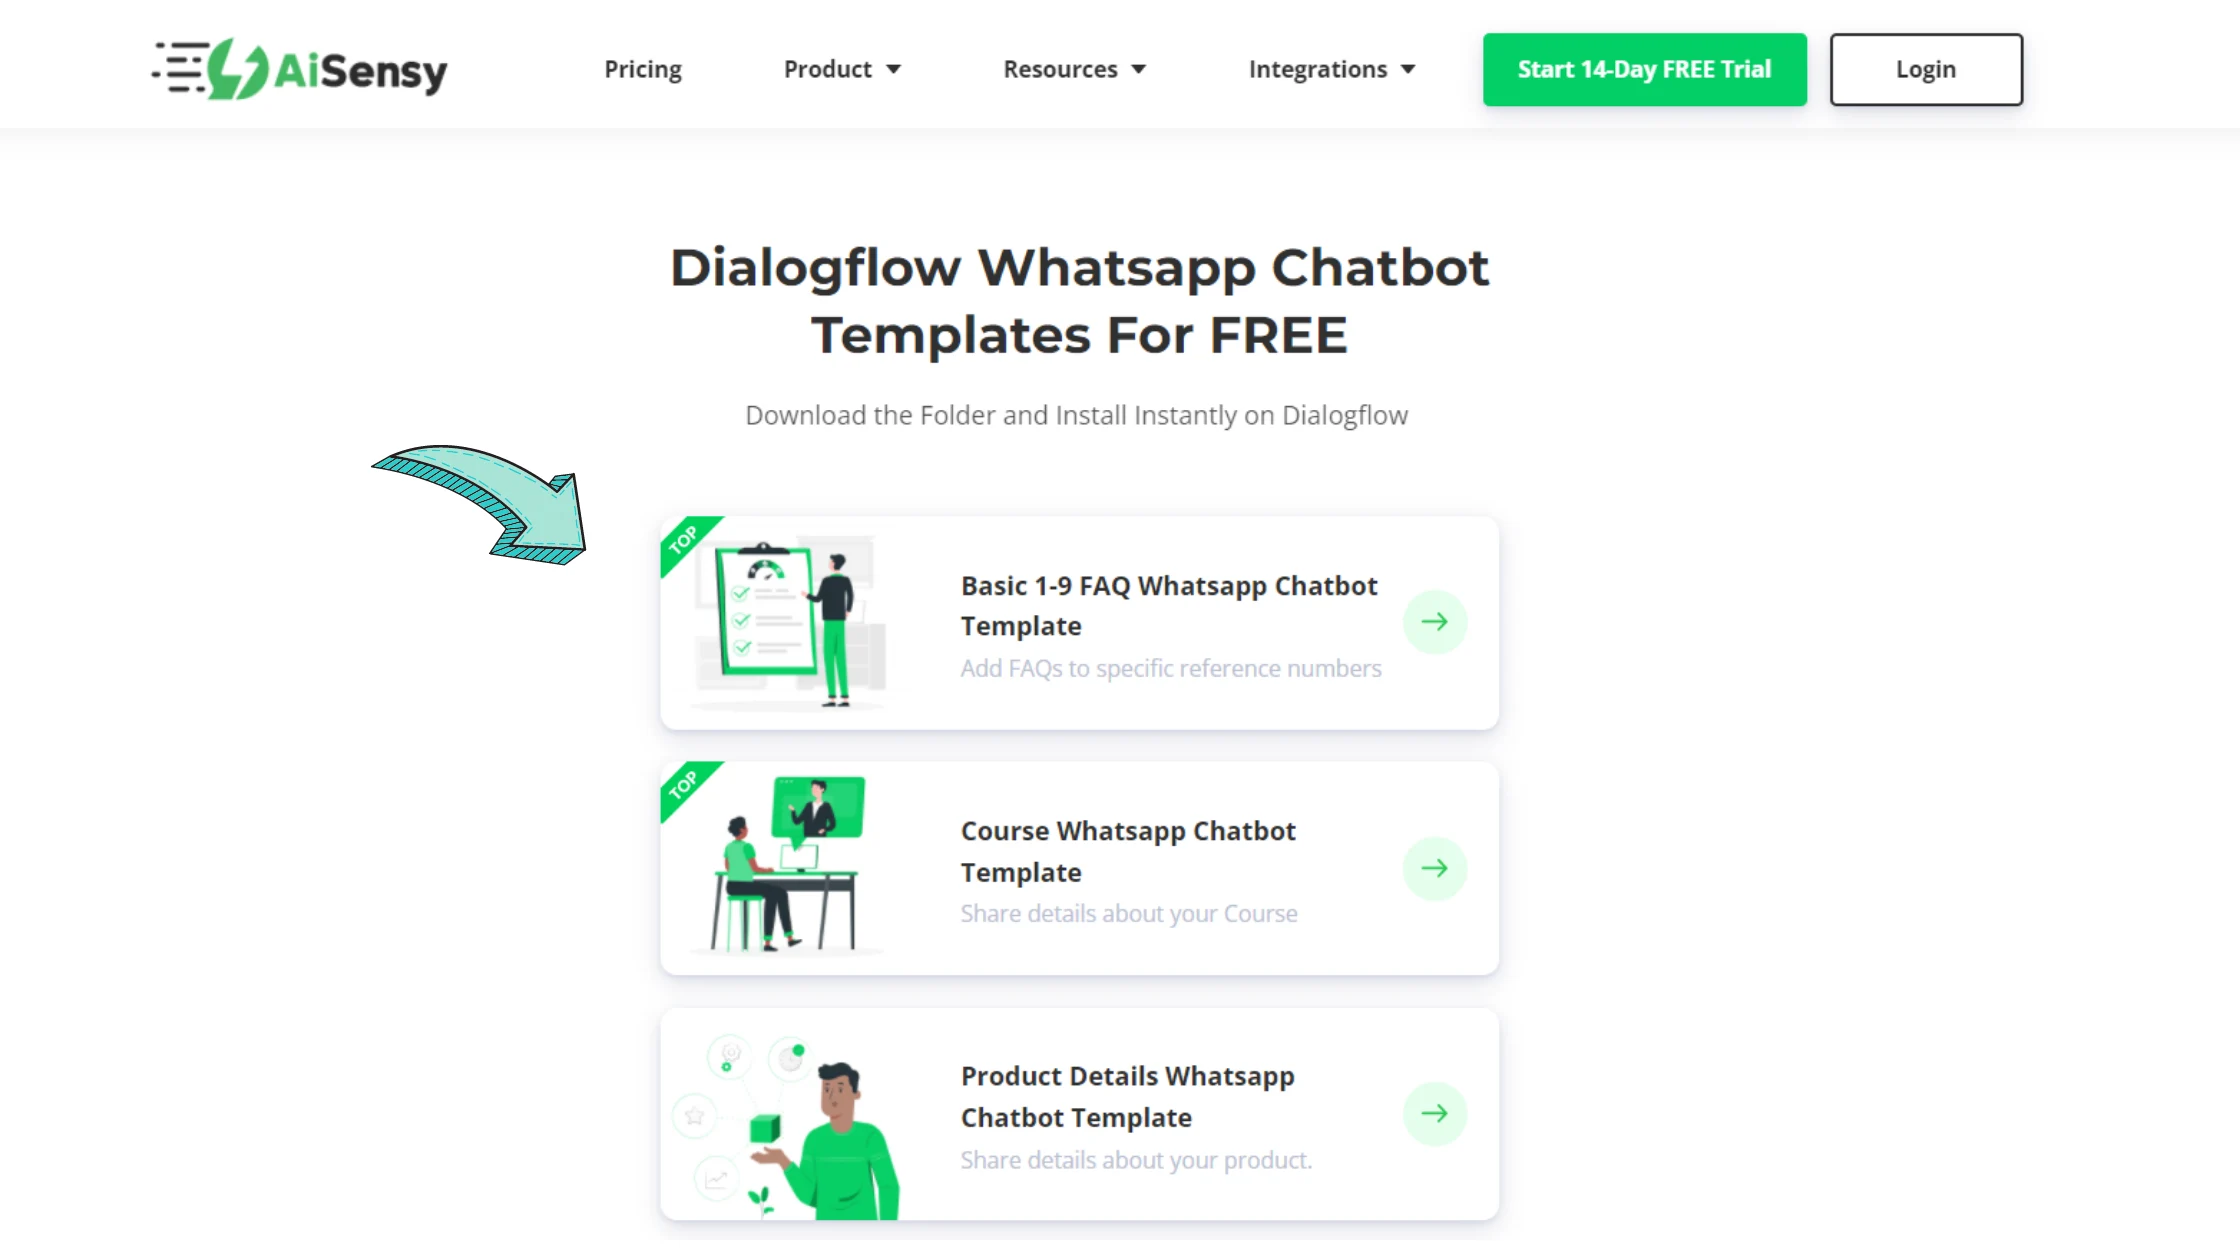 Download a chatbot template